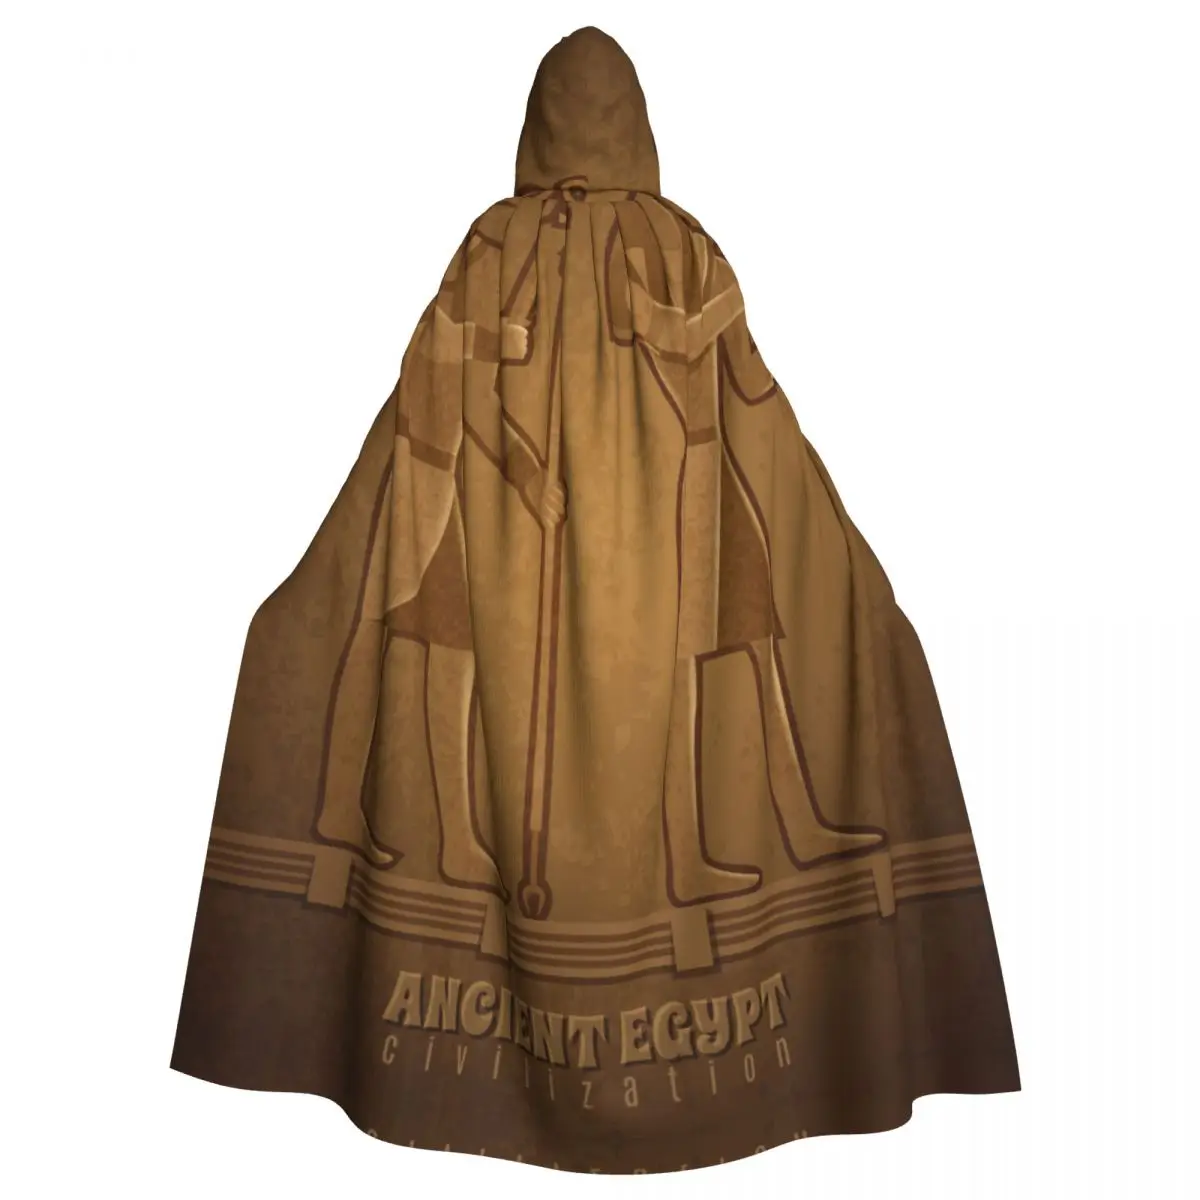 

Hooded Cloak Unisex Cloak with Hood Ancient Egyptian Illustration Cloak Vampire Witch Cape Cosplay Costume